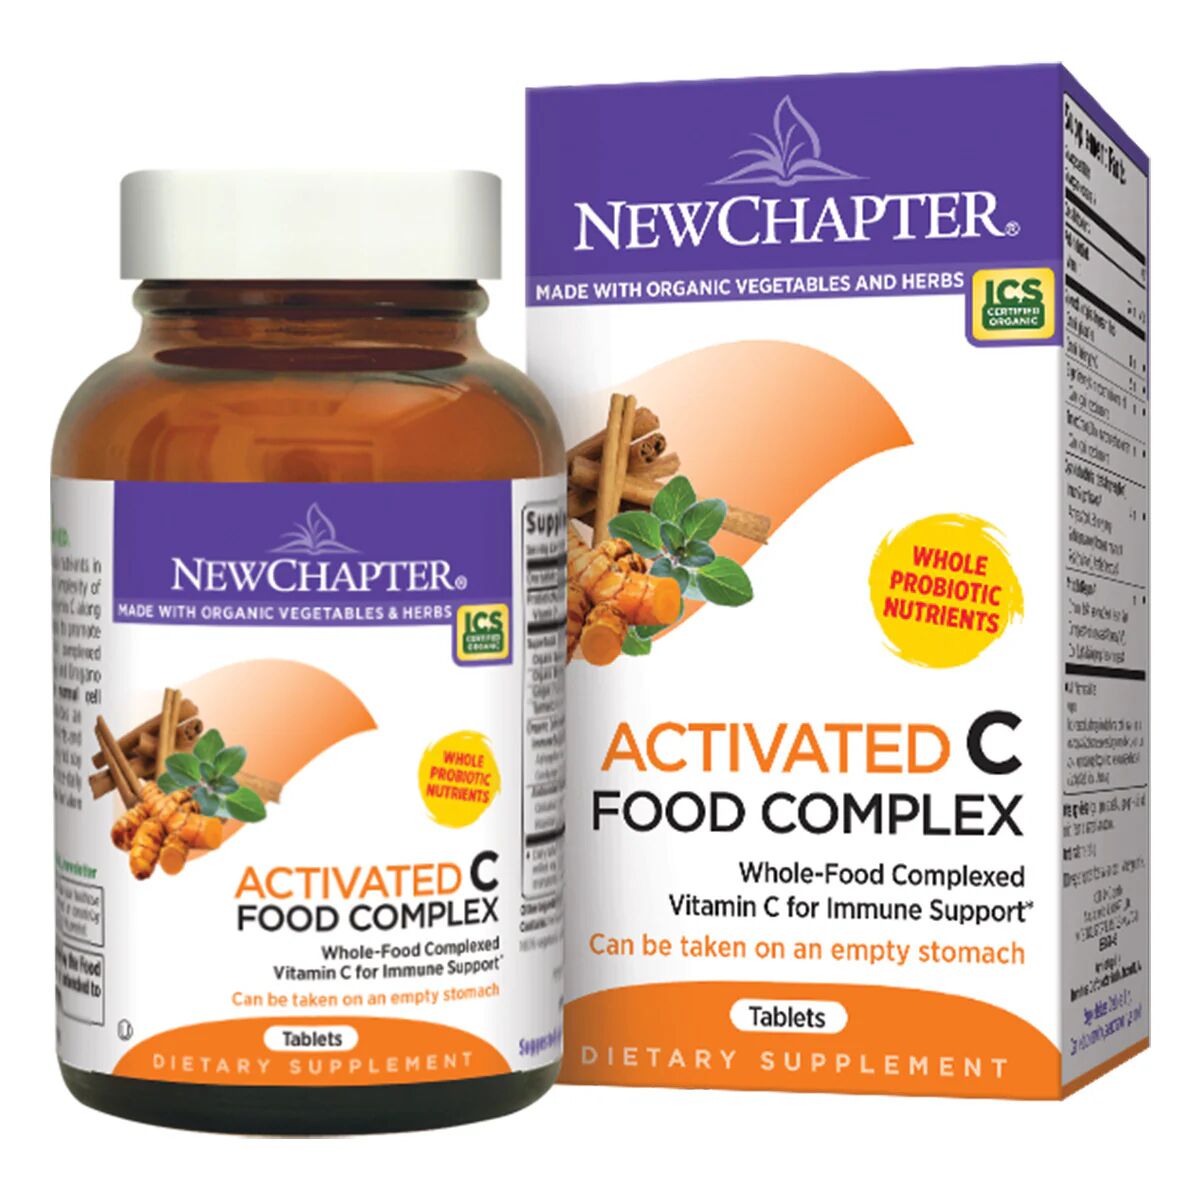 New Chapter Activated C Food Complex (60 count) #10073920